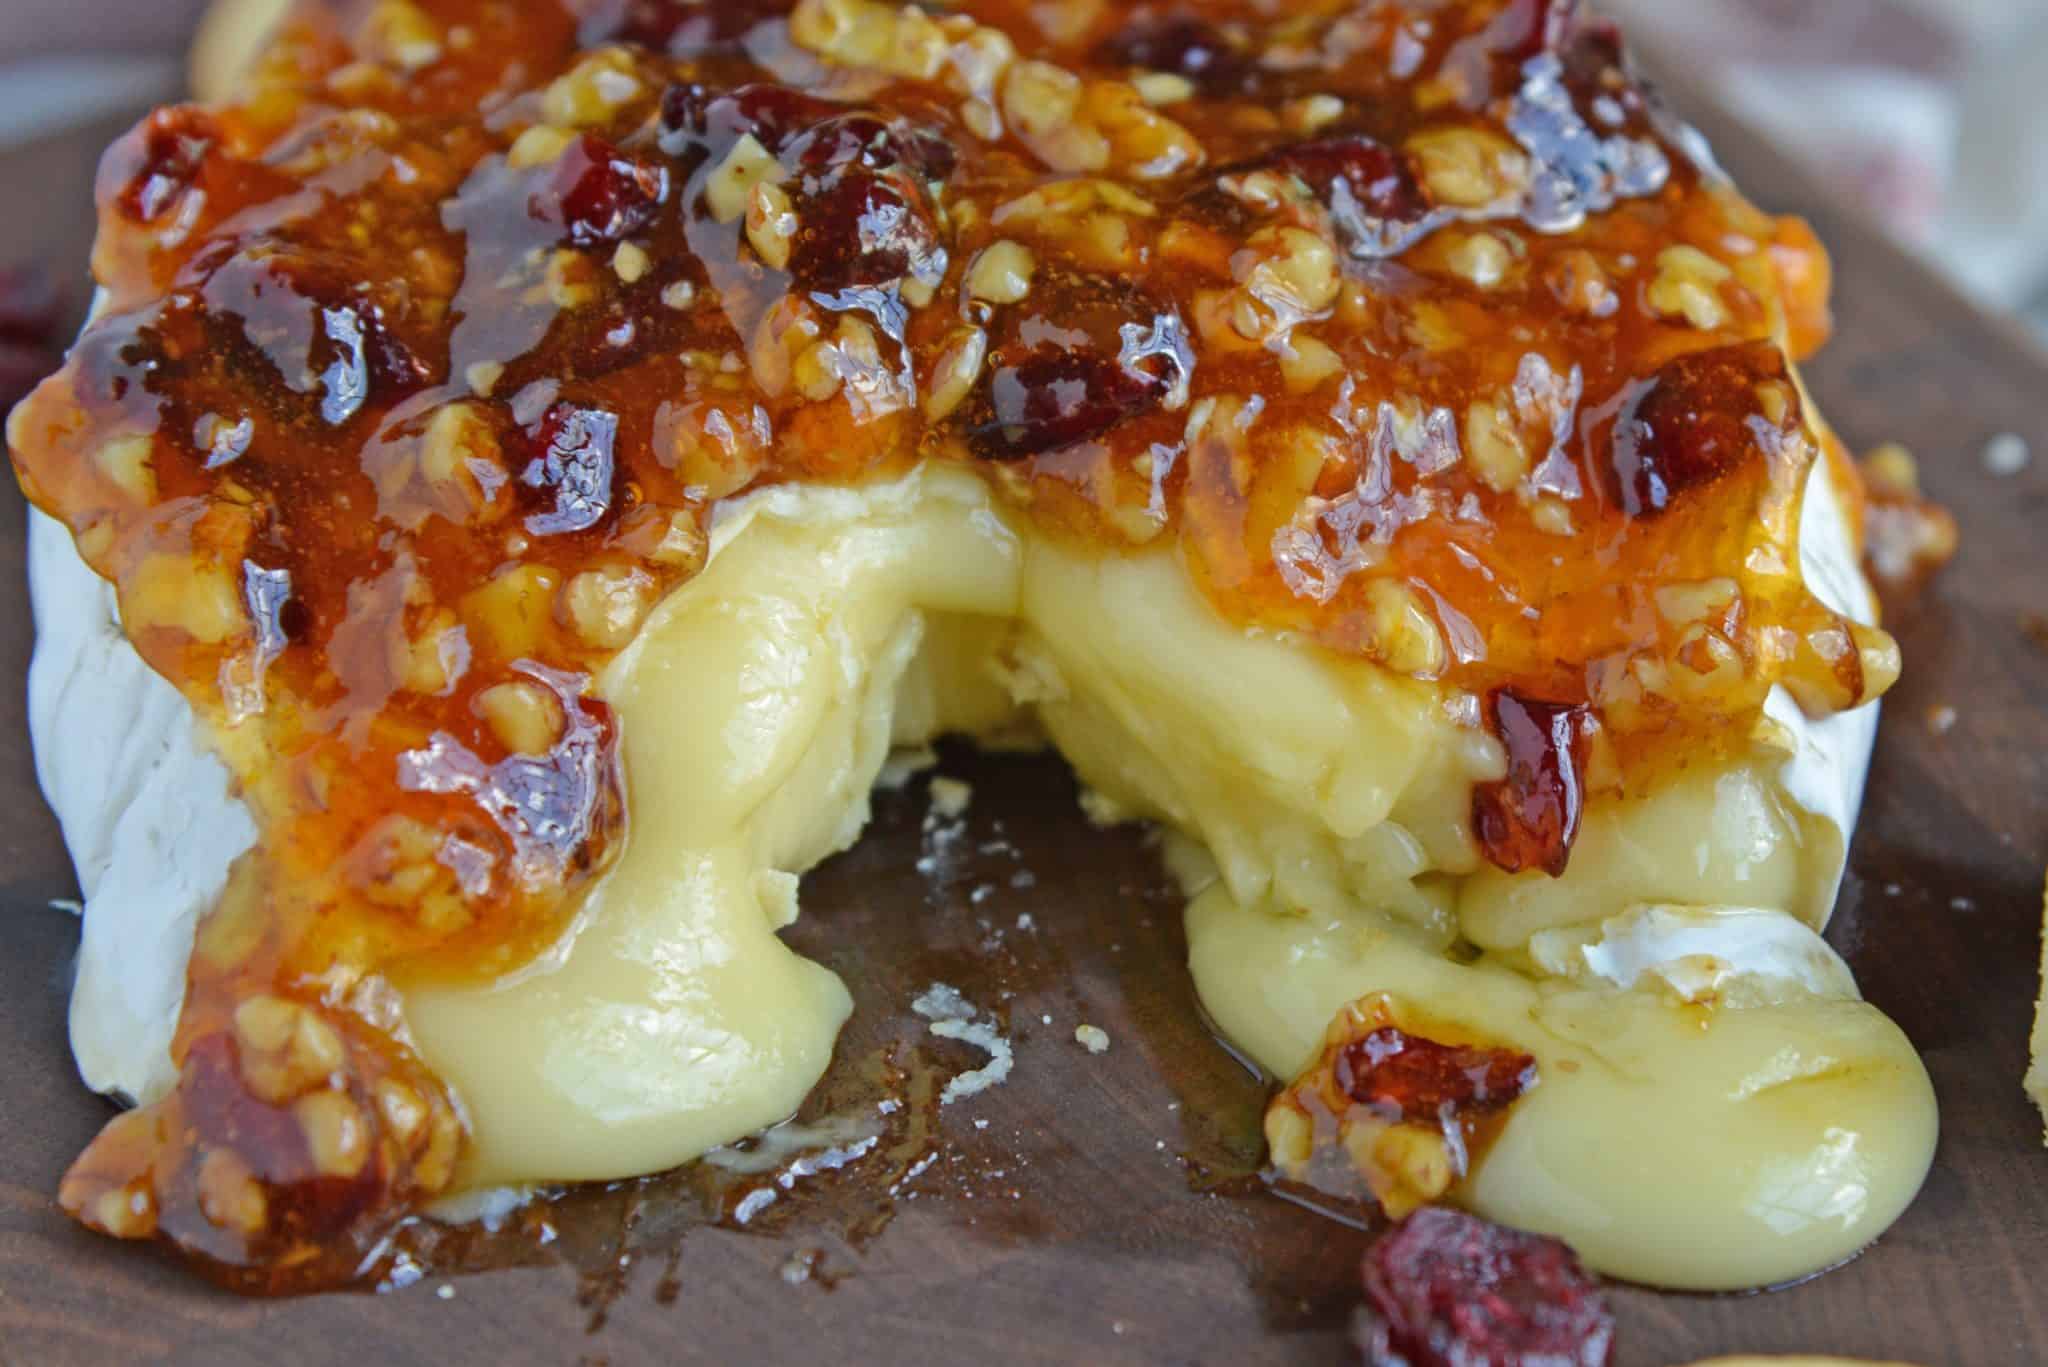 Apricot Cranberry Baked Brie is the ultimate appetizer. This baked brie appetizer will be perfect for any occasion. #bakedbrierecipe #bakedbrieappetizer www.savoryexperiments.com